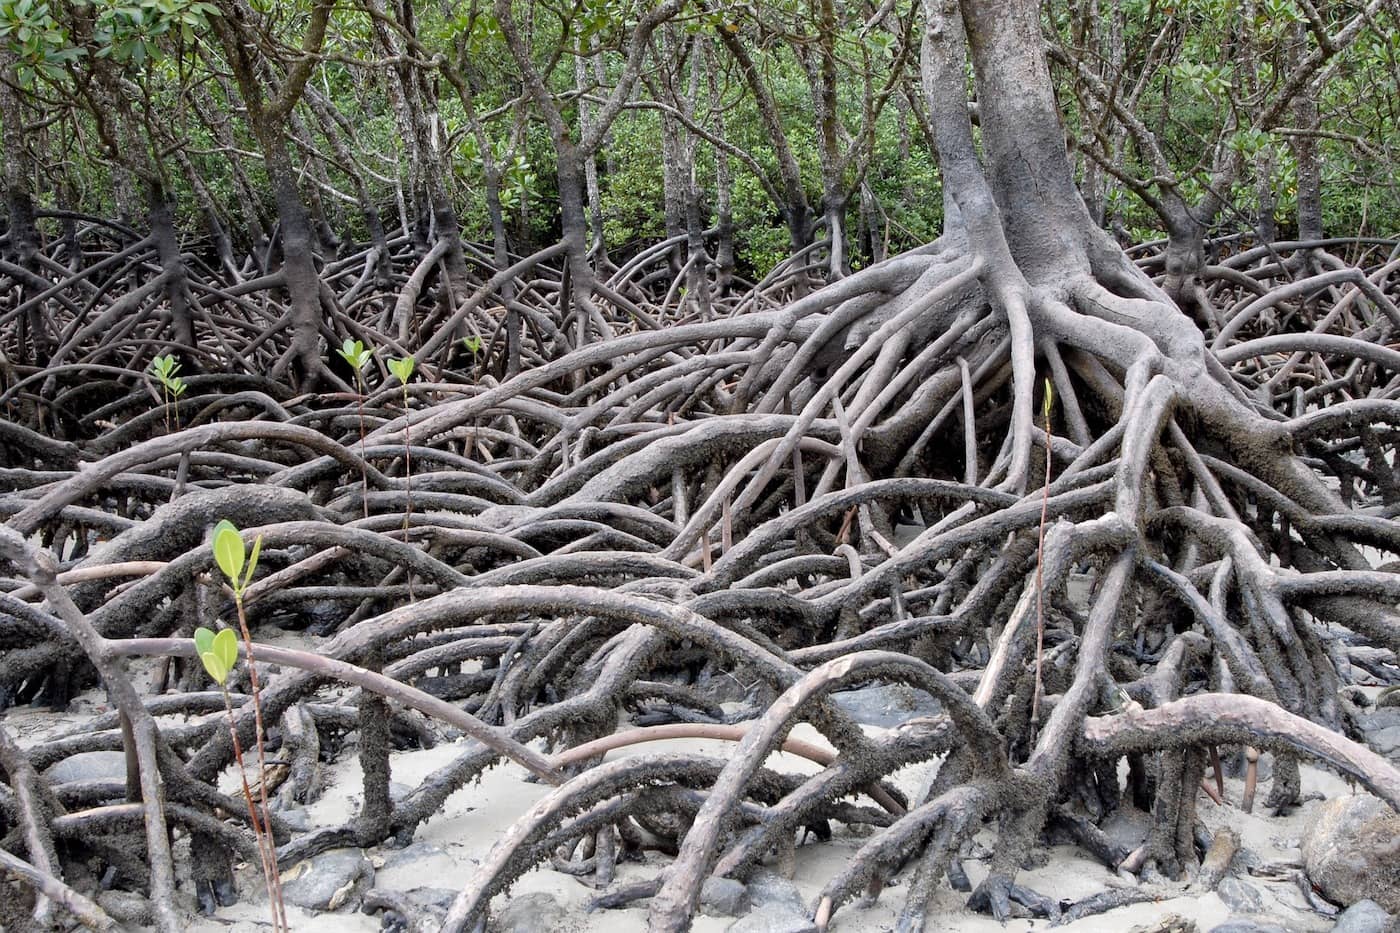 Hundreds of mangrove roots emerge from the ground and arc back into the ground